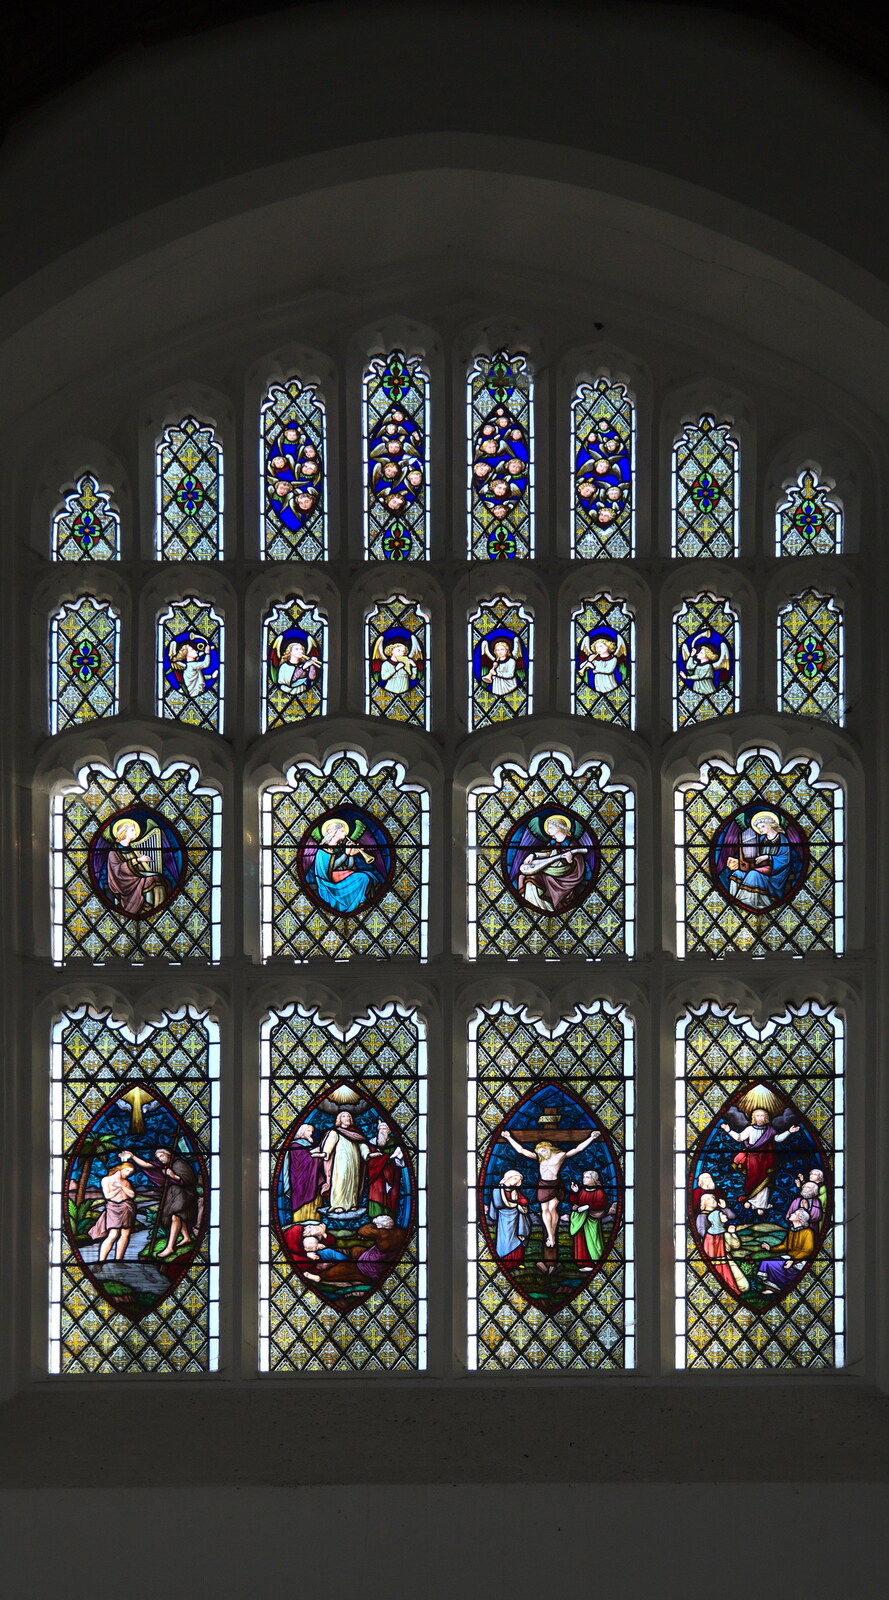 A Postcard from Bungay, Suffolk - 2nd November 2022: Simple stained glass windows